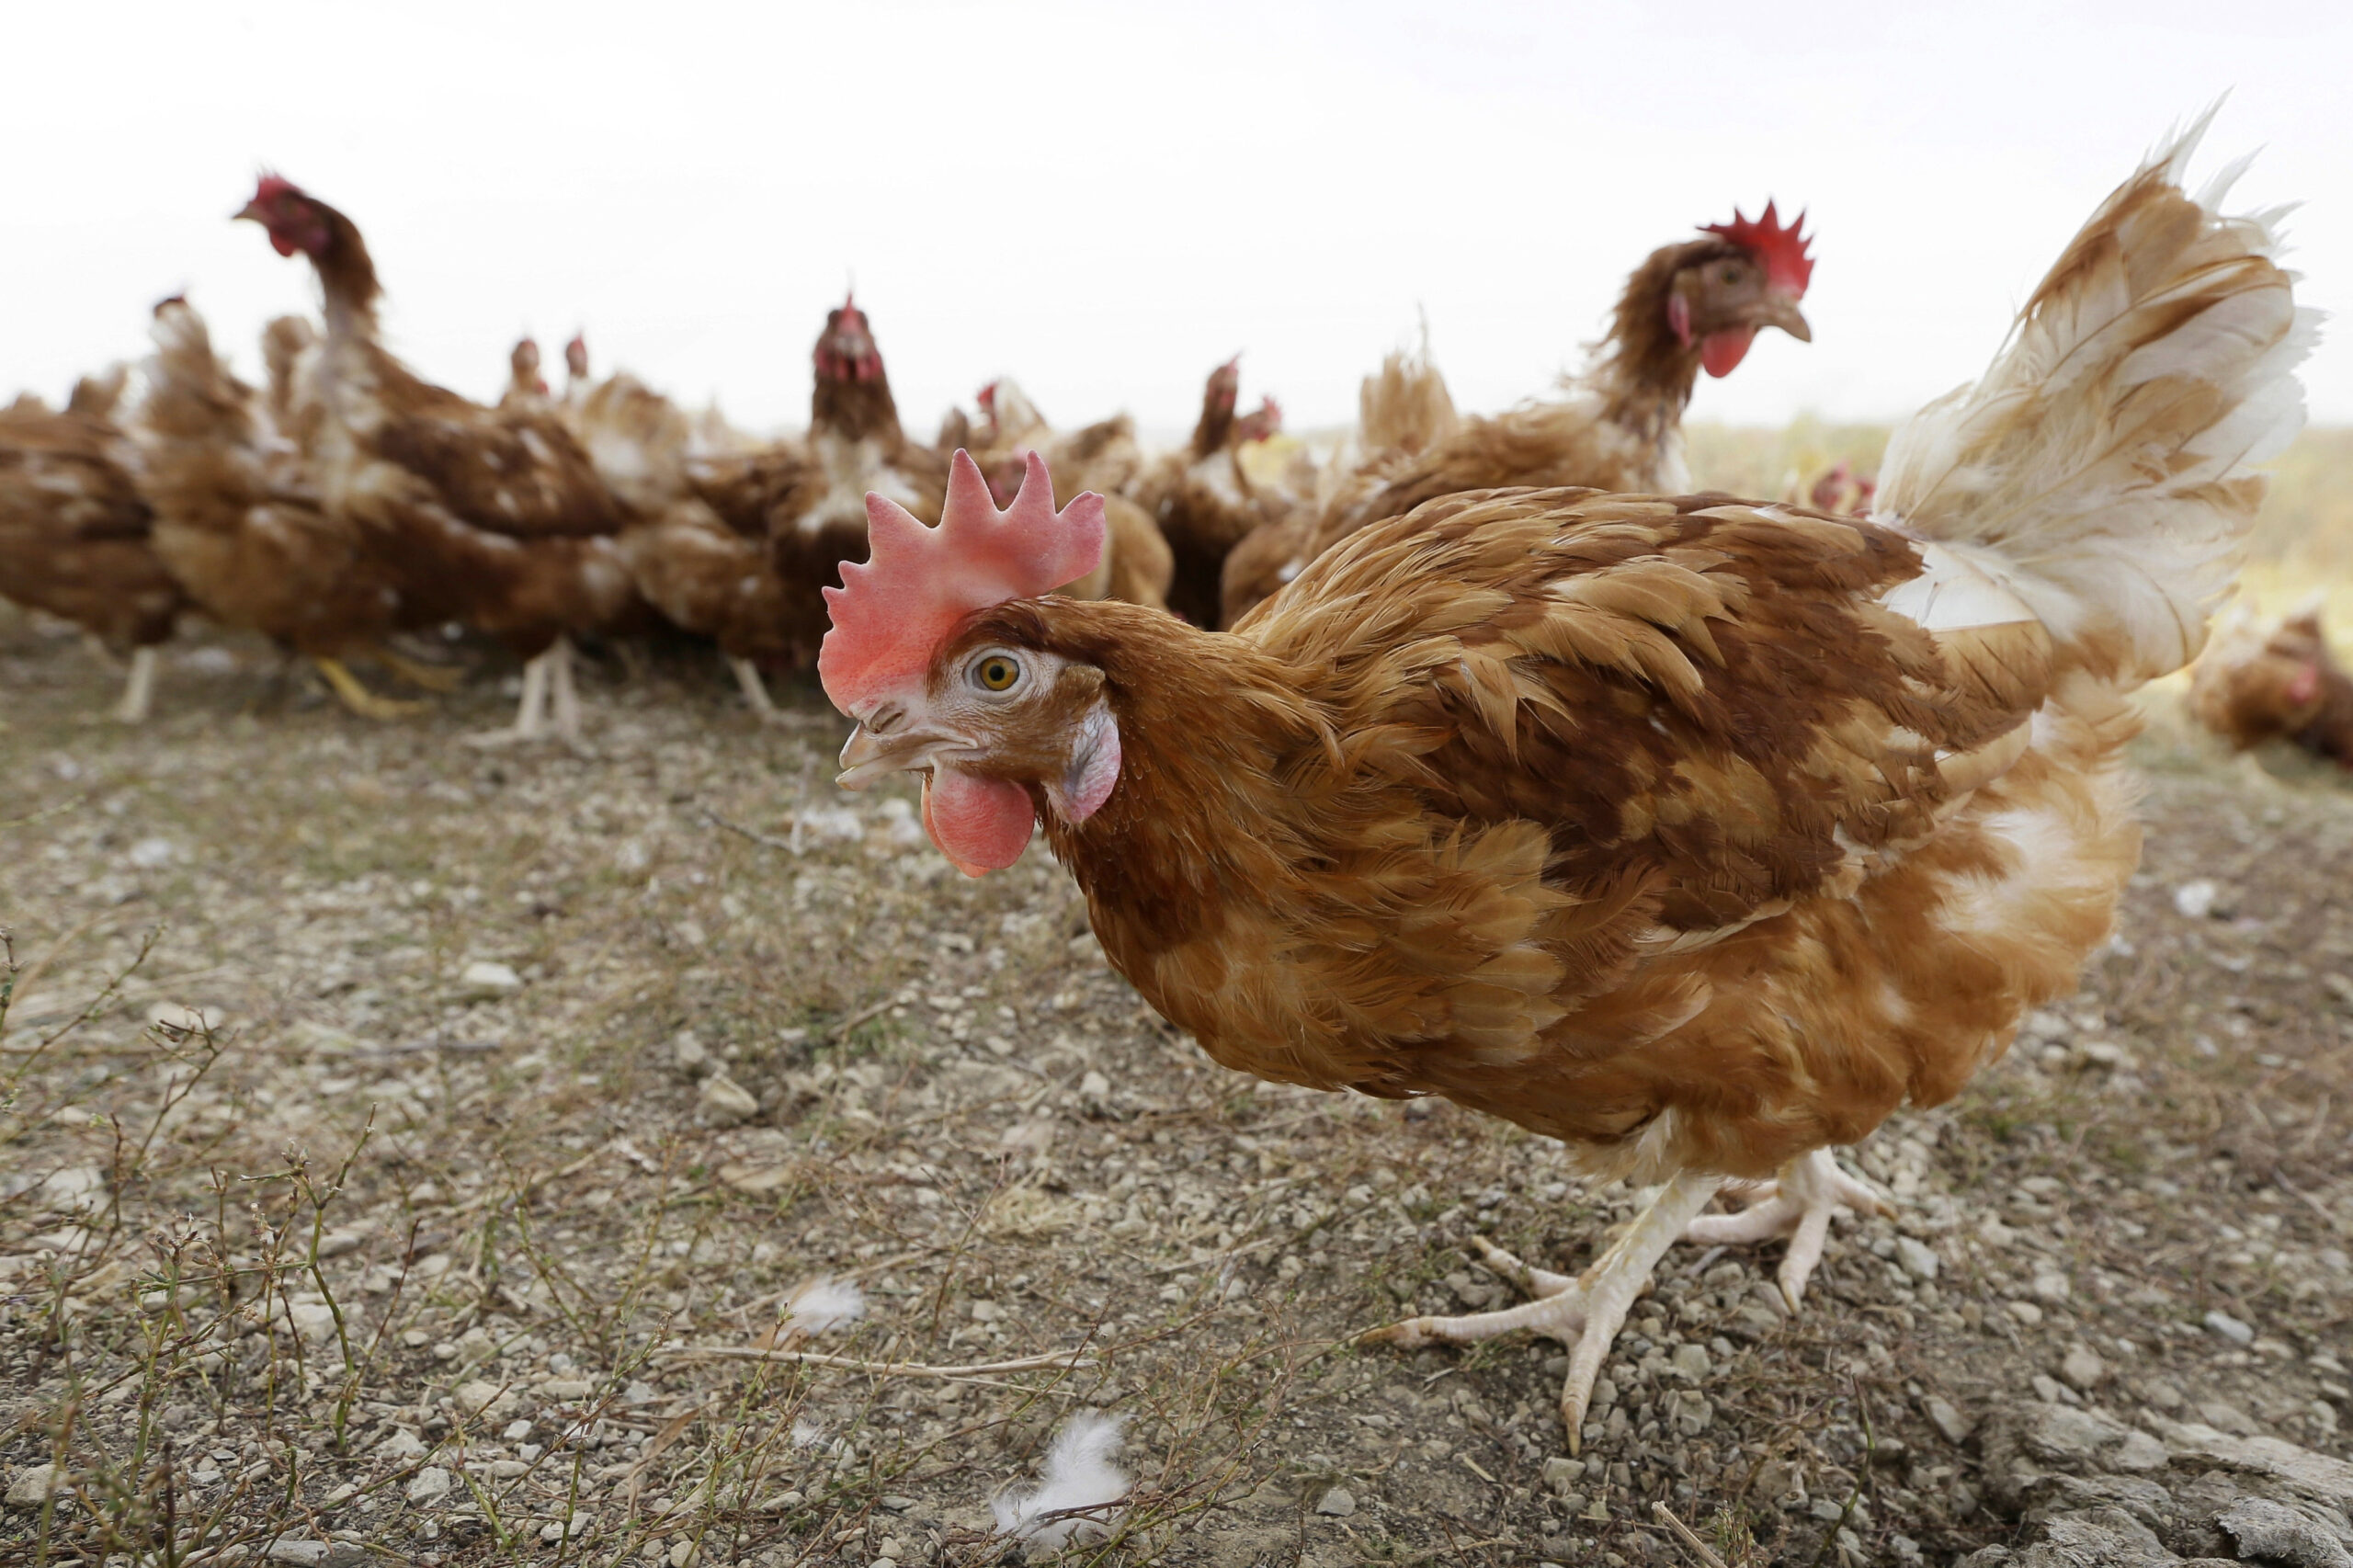 cage-free chickens walk in a fenced pasture at an organic farm